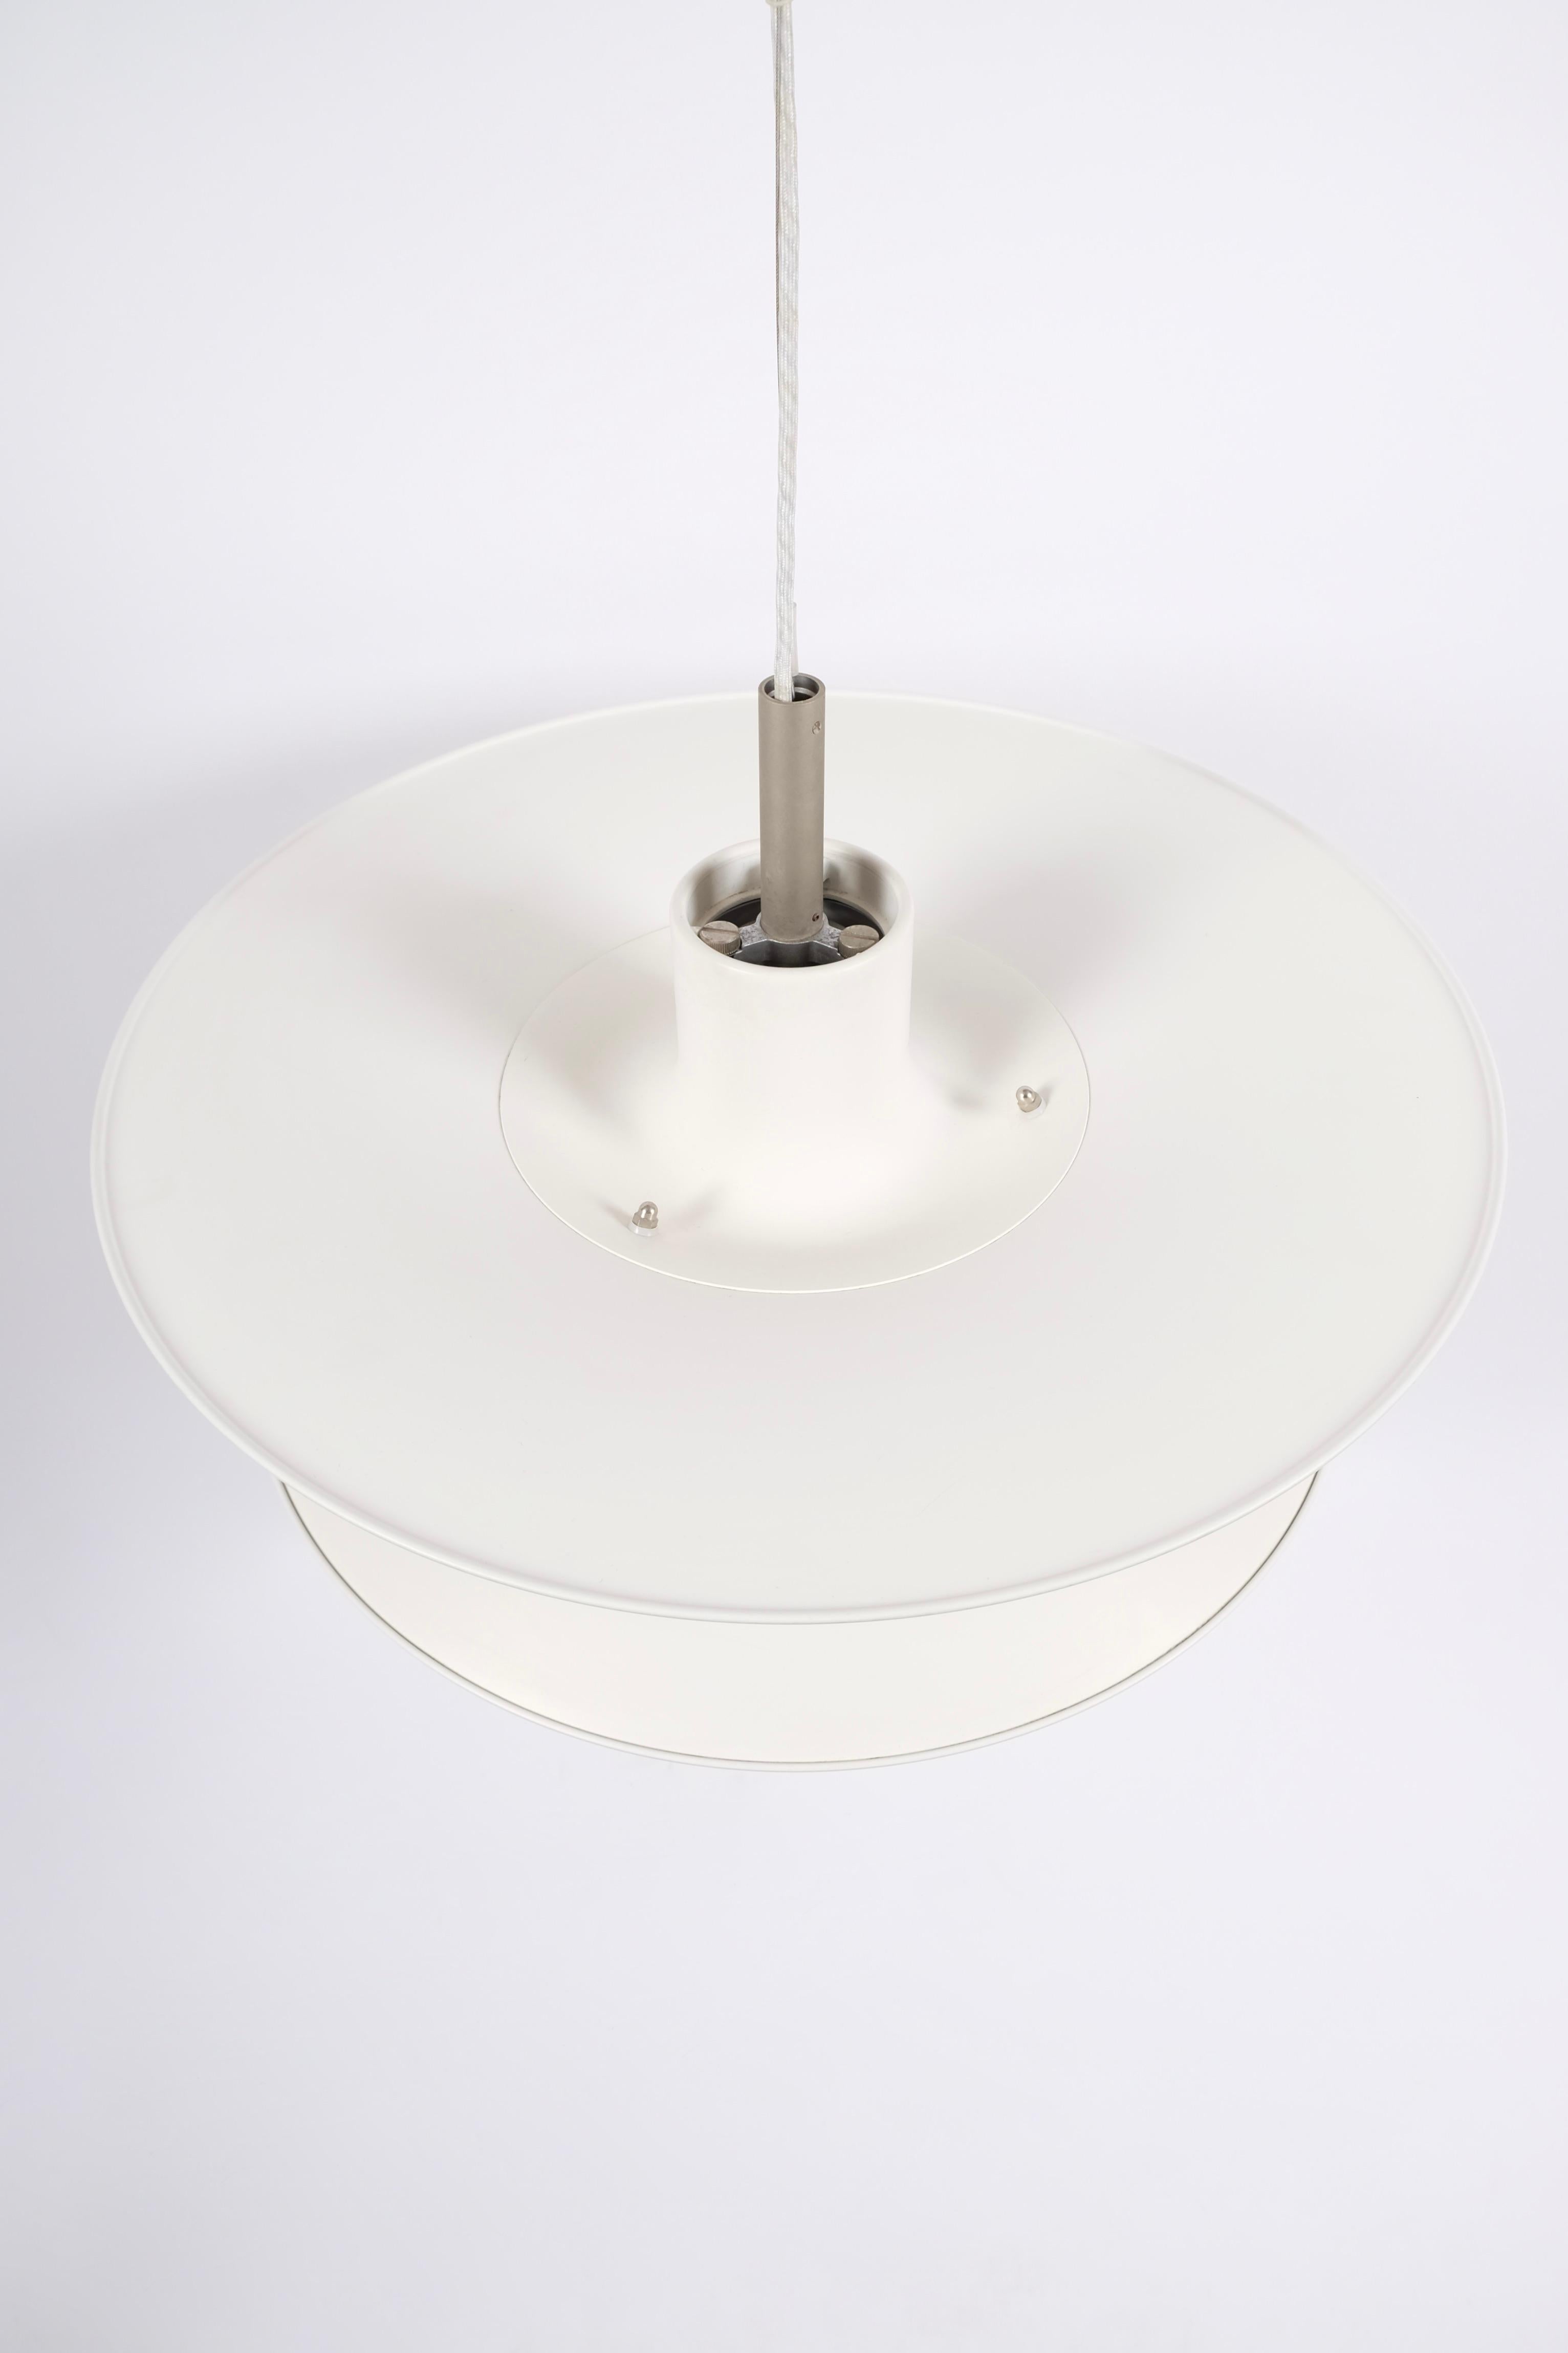 We have 2 matching of these iconic pendants.
Designed by the well known light designer Poul Henningsen.
Gives a beautifull soft light.
E40 socket
Mounted with 1,5 meter electric fabric wire and suspension wire.
Bottom disc included on both